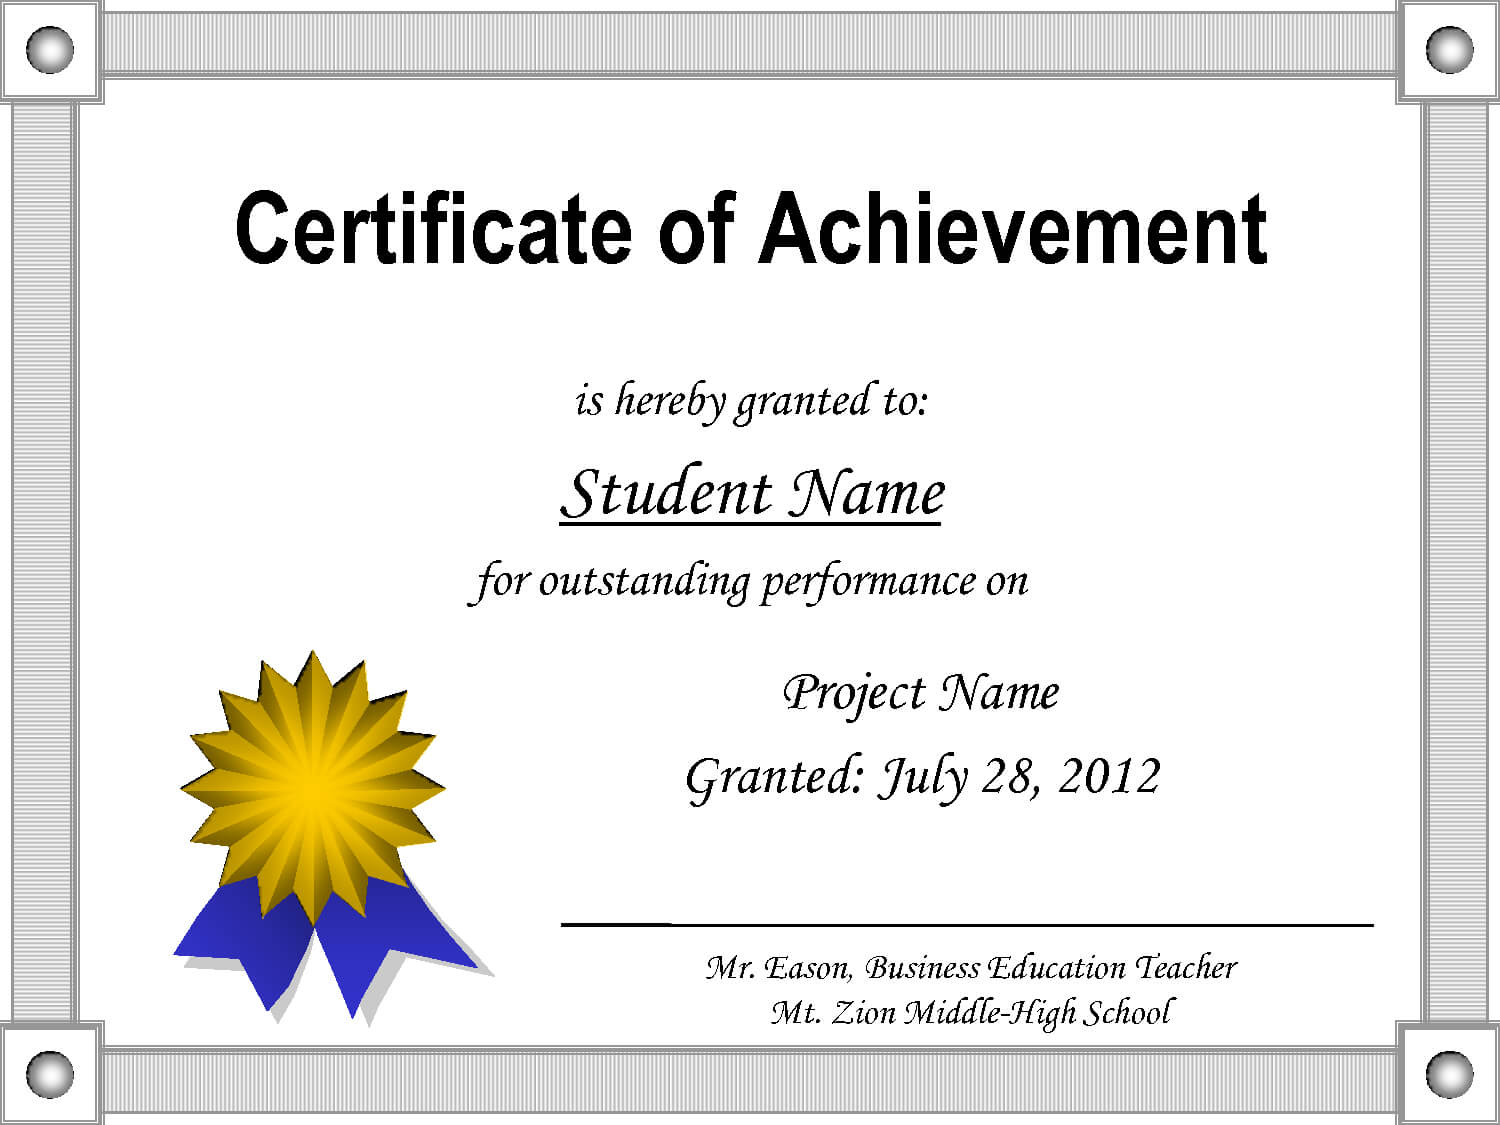 Achievement Certificate Template Free – Cerescoffee.co Pertaining To Softball Certificate Templates Free